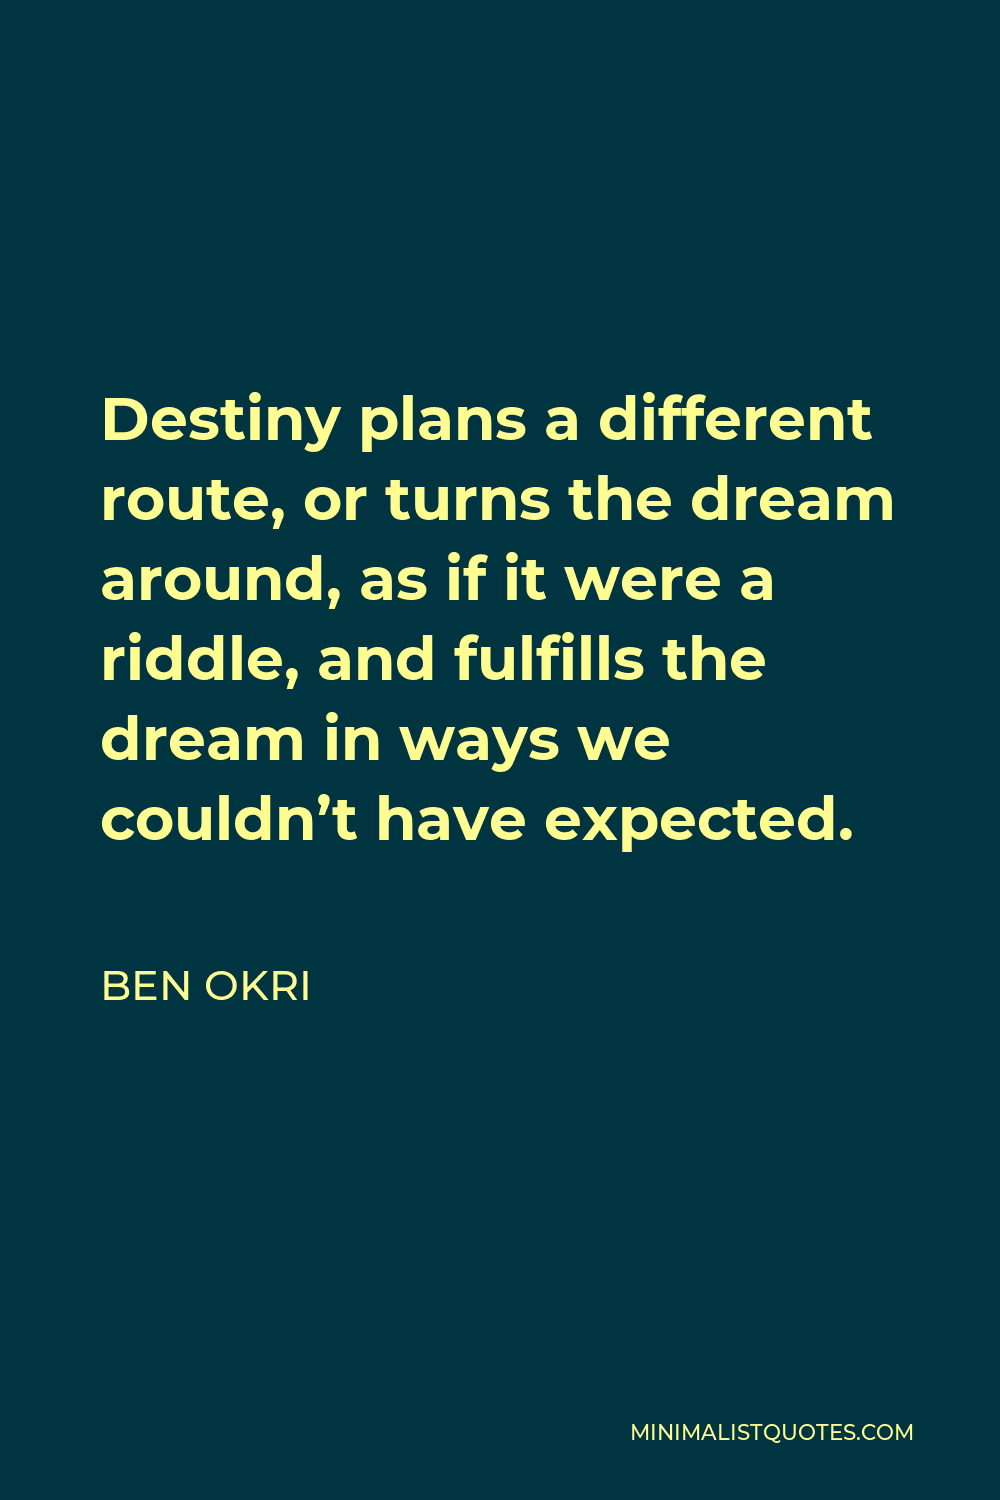 Ben Okri Quote - Destiny plans a different route, or turns the dream around, as if it were a riddle, and fulfills the dream in ways we couldn’t have expected.